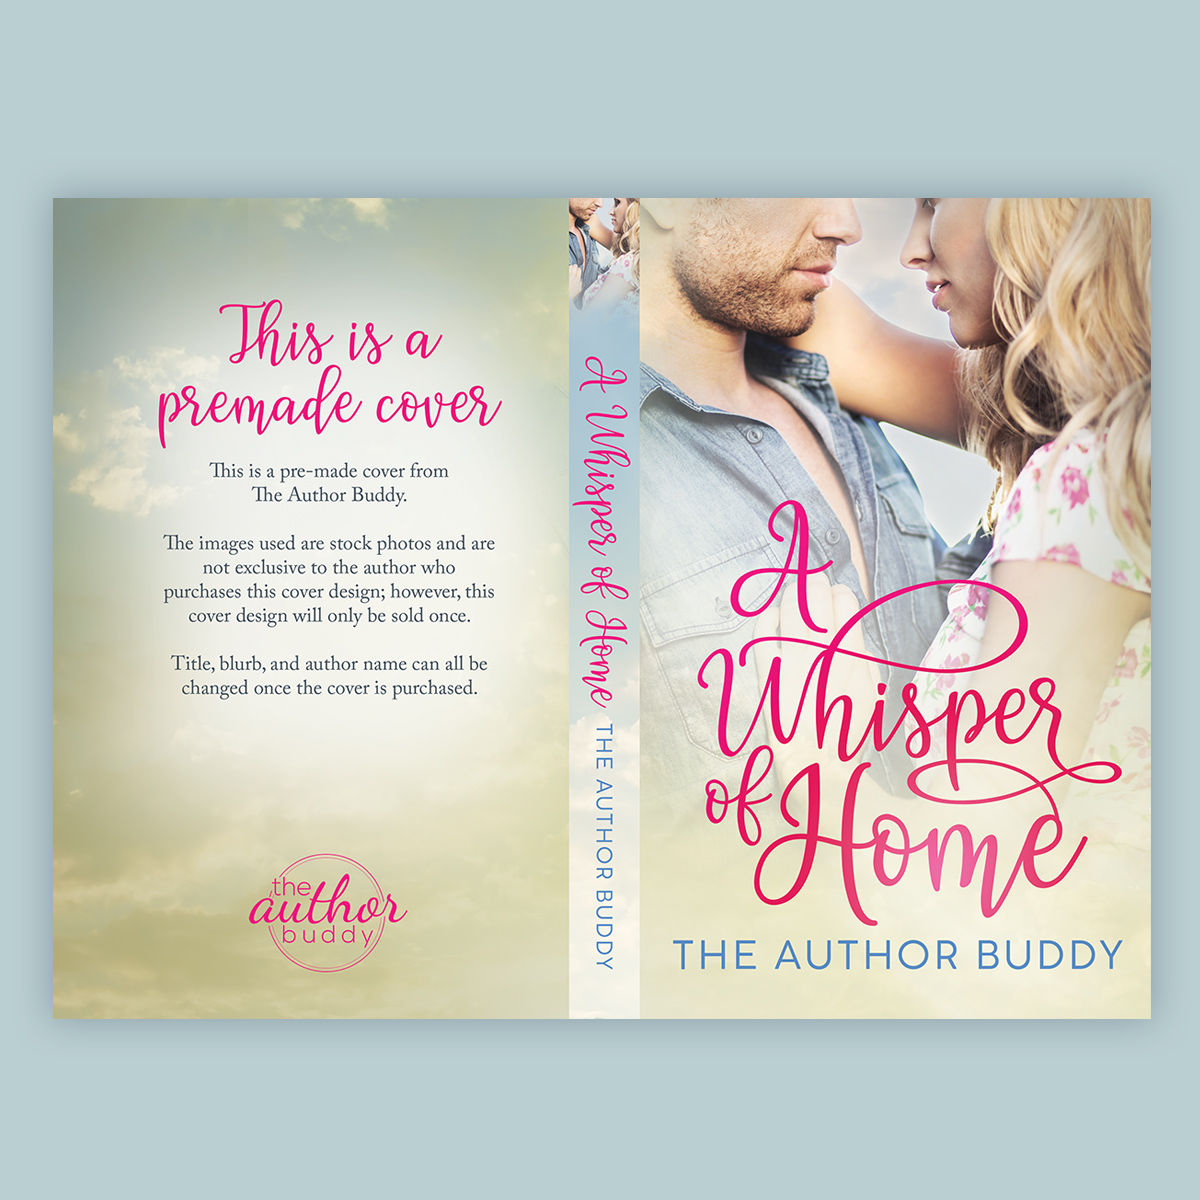 A Whisper of Home - Premade Book Cover from The Author Buddy